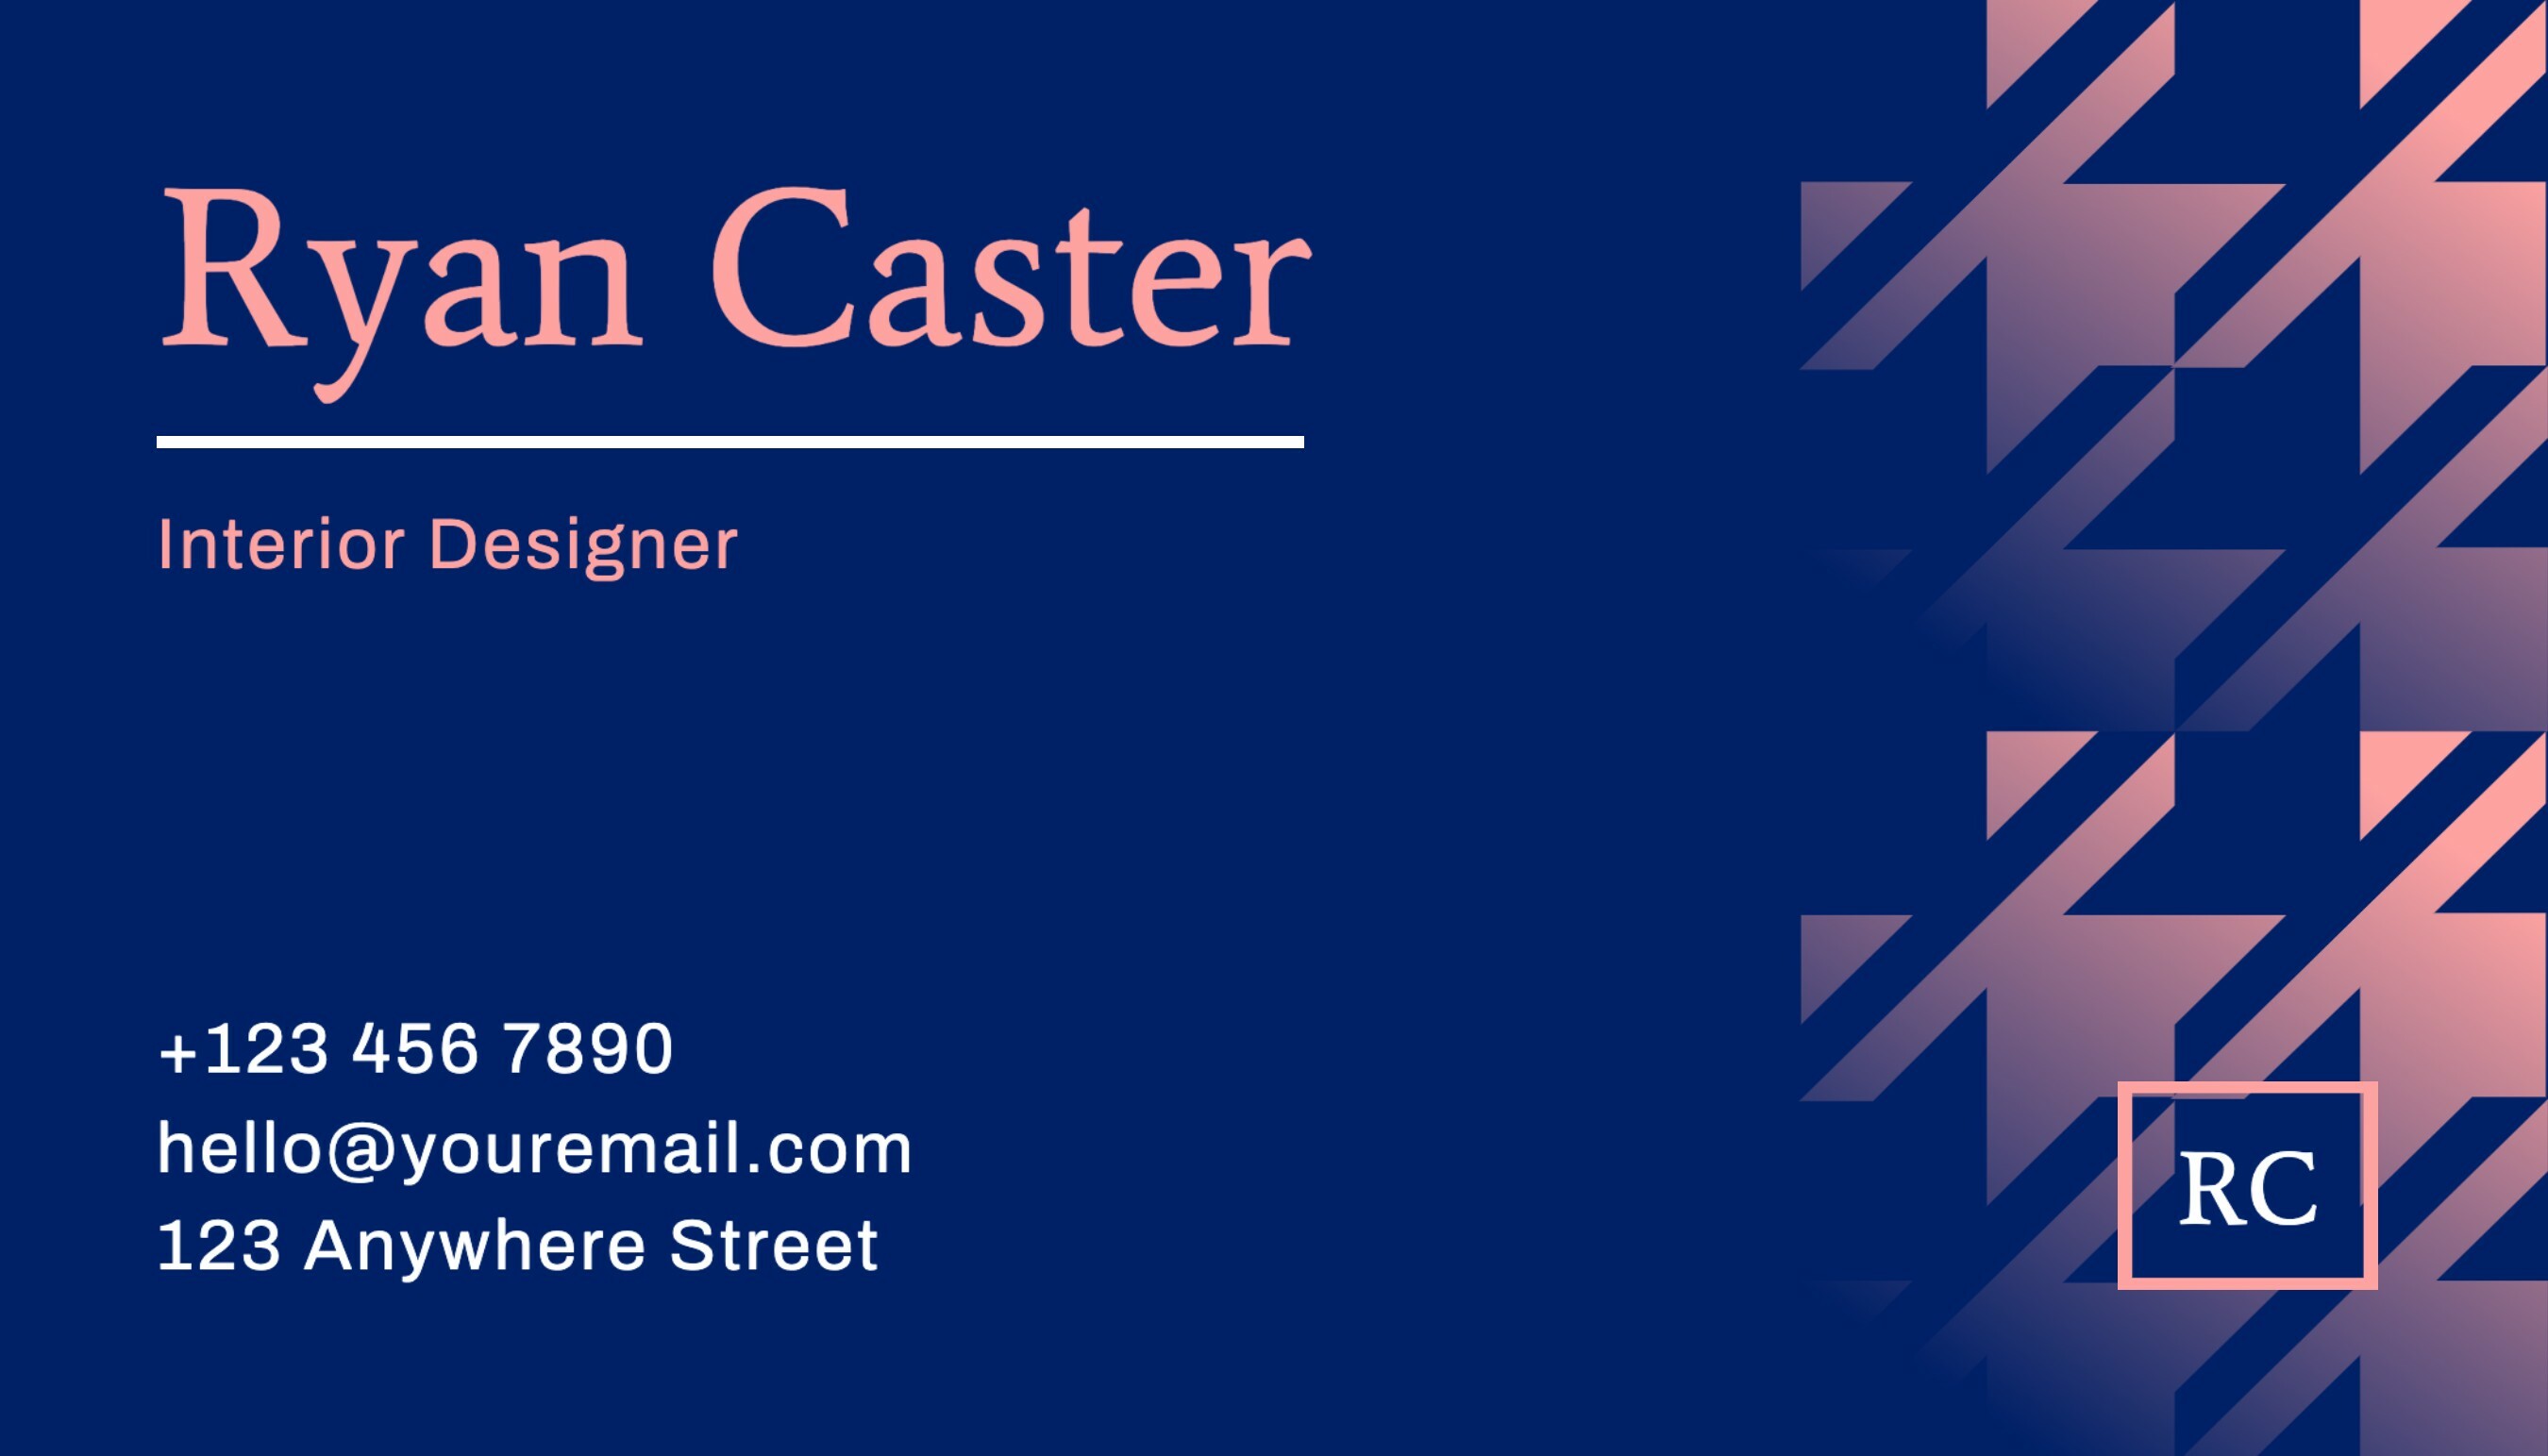 Blue Minimalist Architect and Interior Design Business Card template